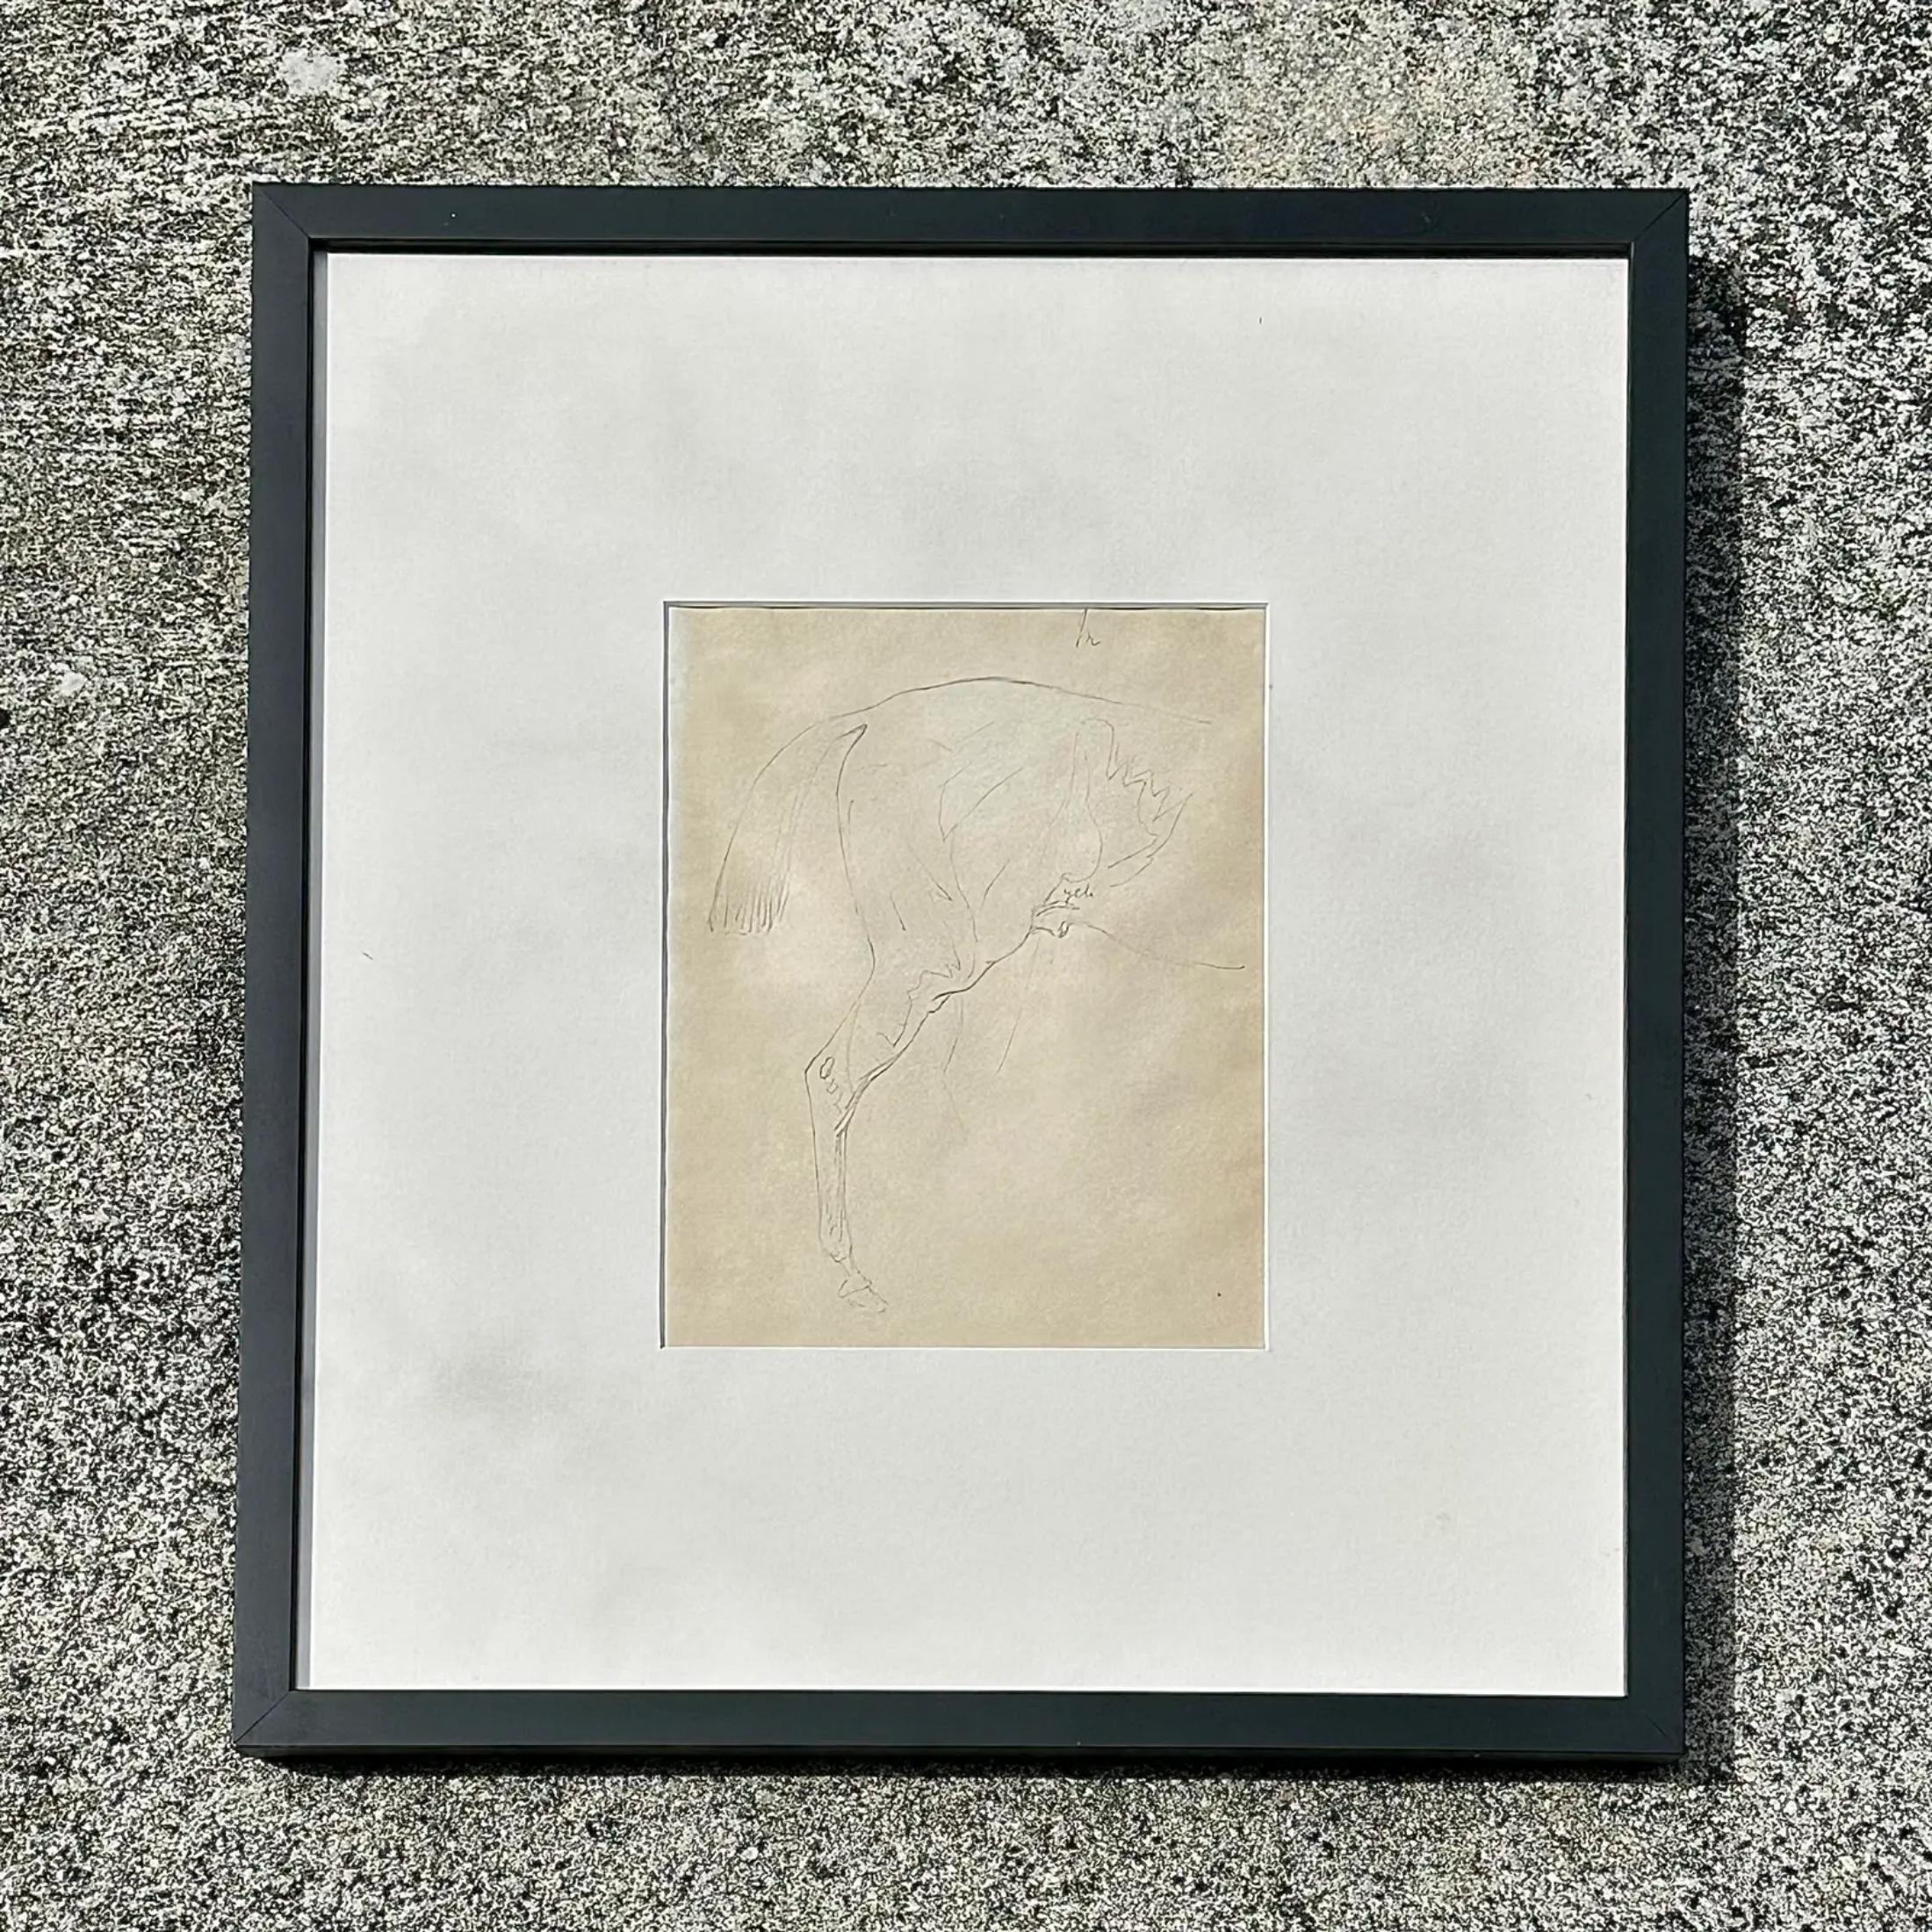 A fantastic vintage sketch of a horses hind legs on paper with pencil. The sketch comes framed and protected with glass. Acquired at a Palm Beach estate.